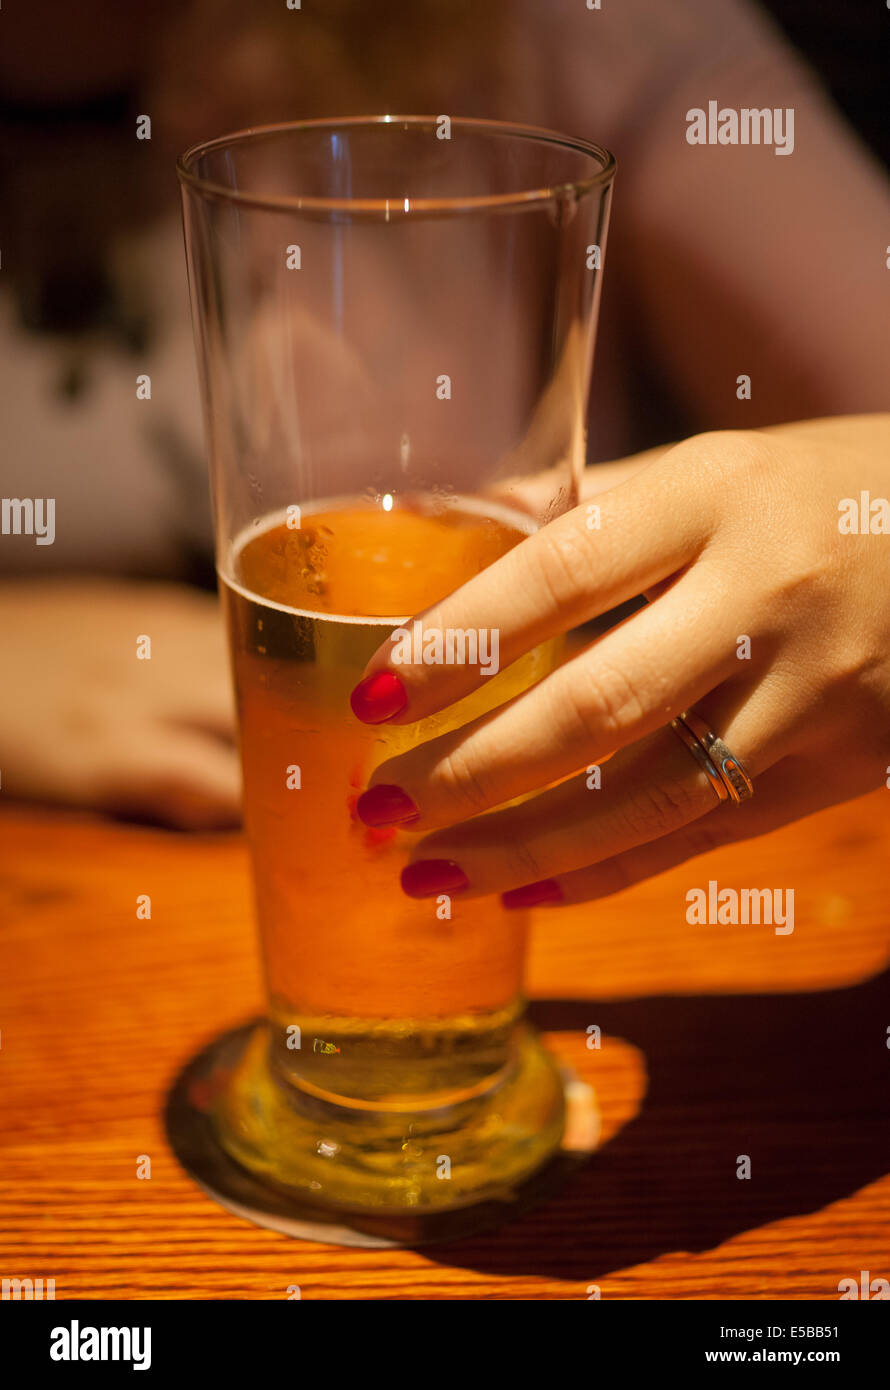 A woman's hand holding a glass of beer Banque D'Images